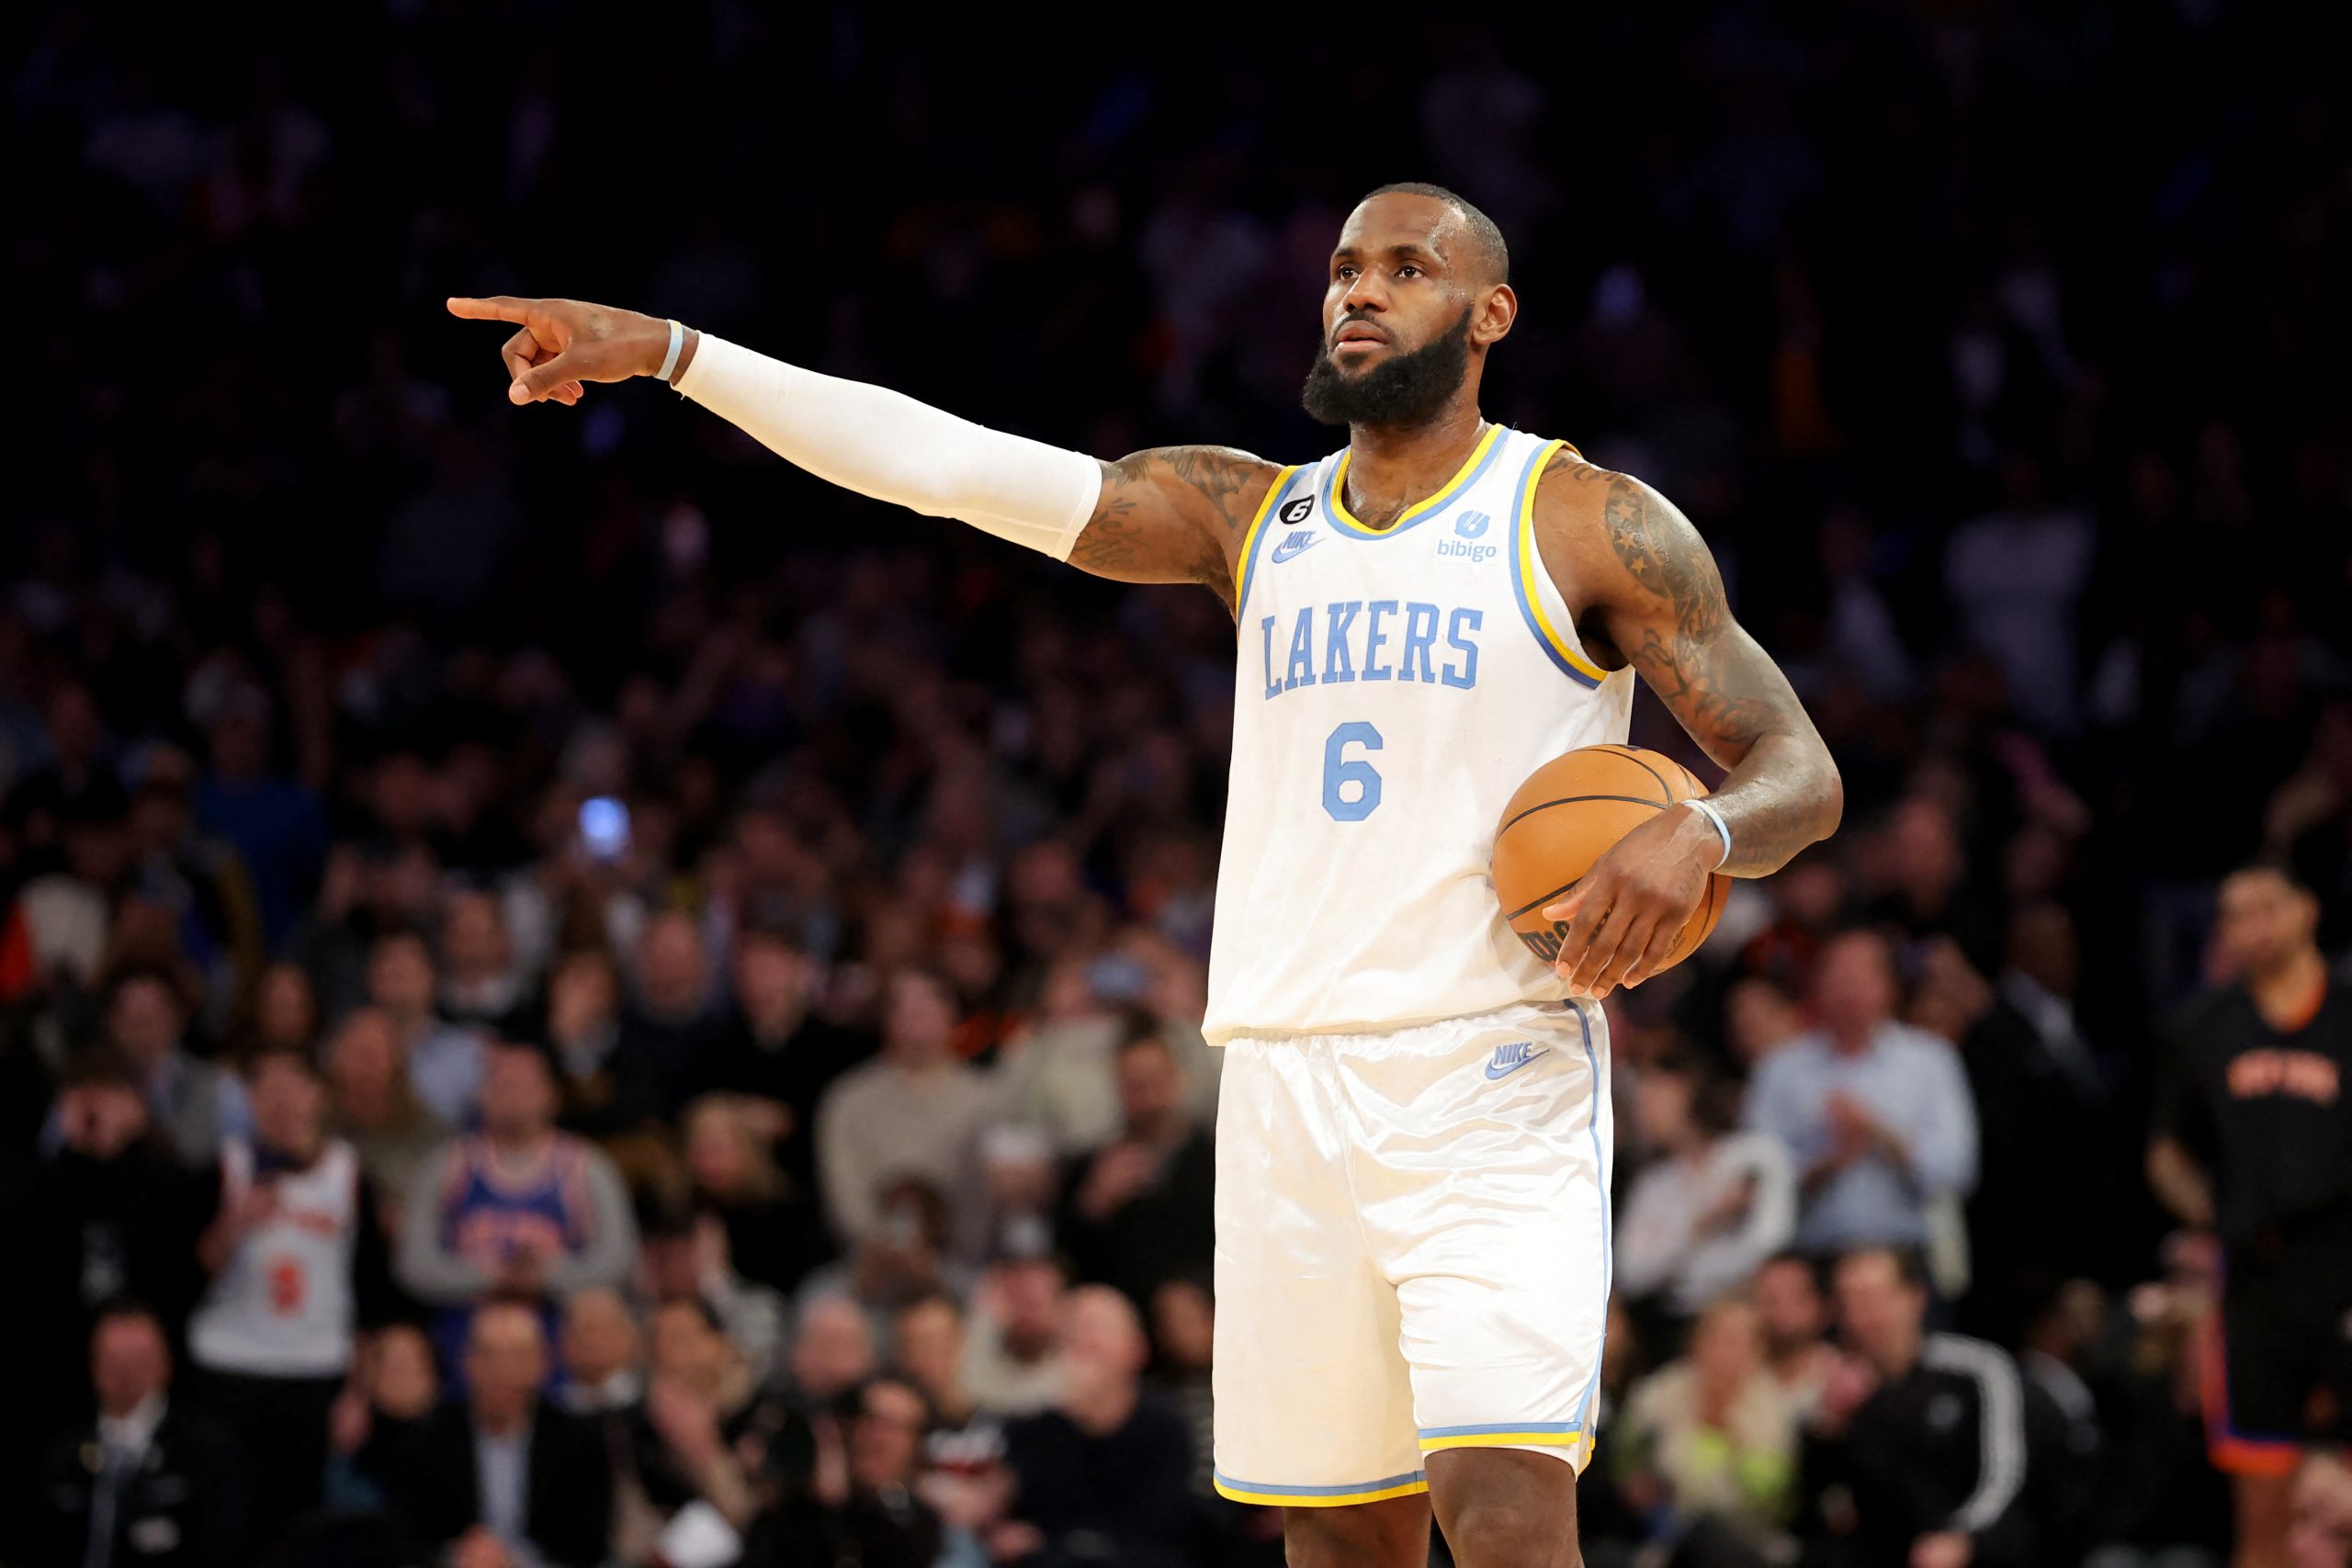 Jan 31, 2023; New York, New York, USA; Los Angeles Lakers forward LeBron James (6) controls the ball against the New York Knicks during the fourth quarter at Madison Square Garden. Mandatory Credit: Brad Penner-USA TODAY Sports Photo: Brad Penner/REUTERS